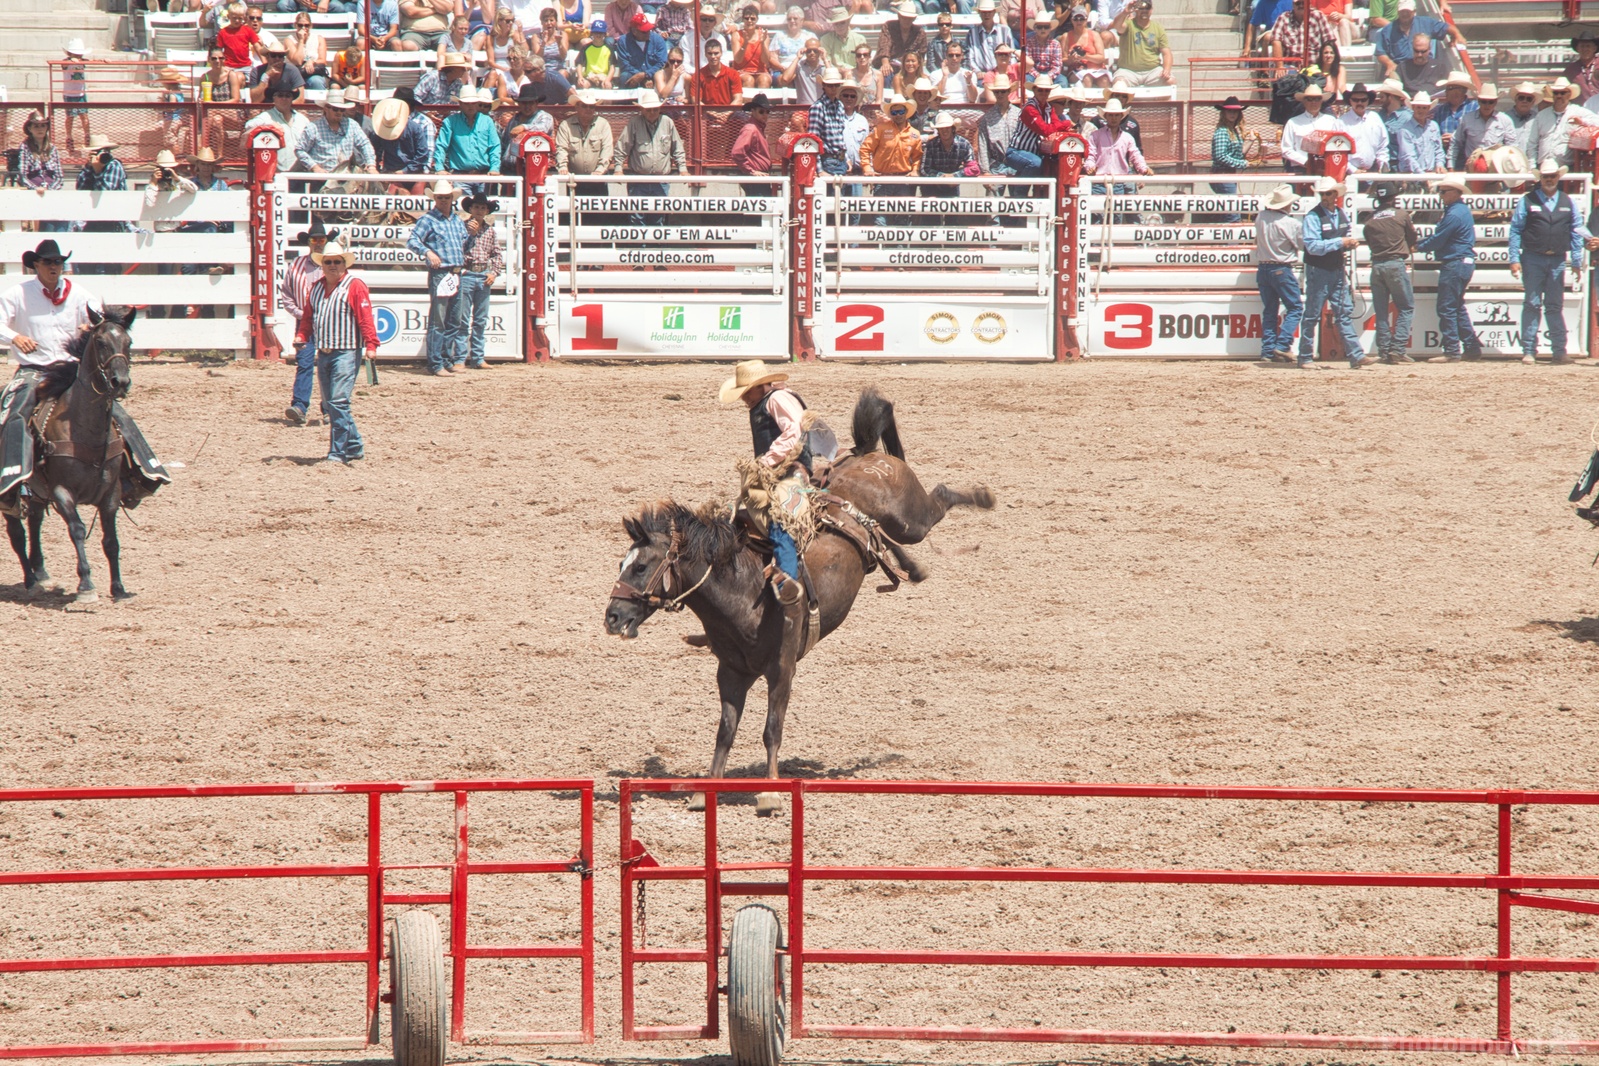 Image of Cheyenne Frontier Days, Wyoming by Jules Renahan